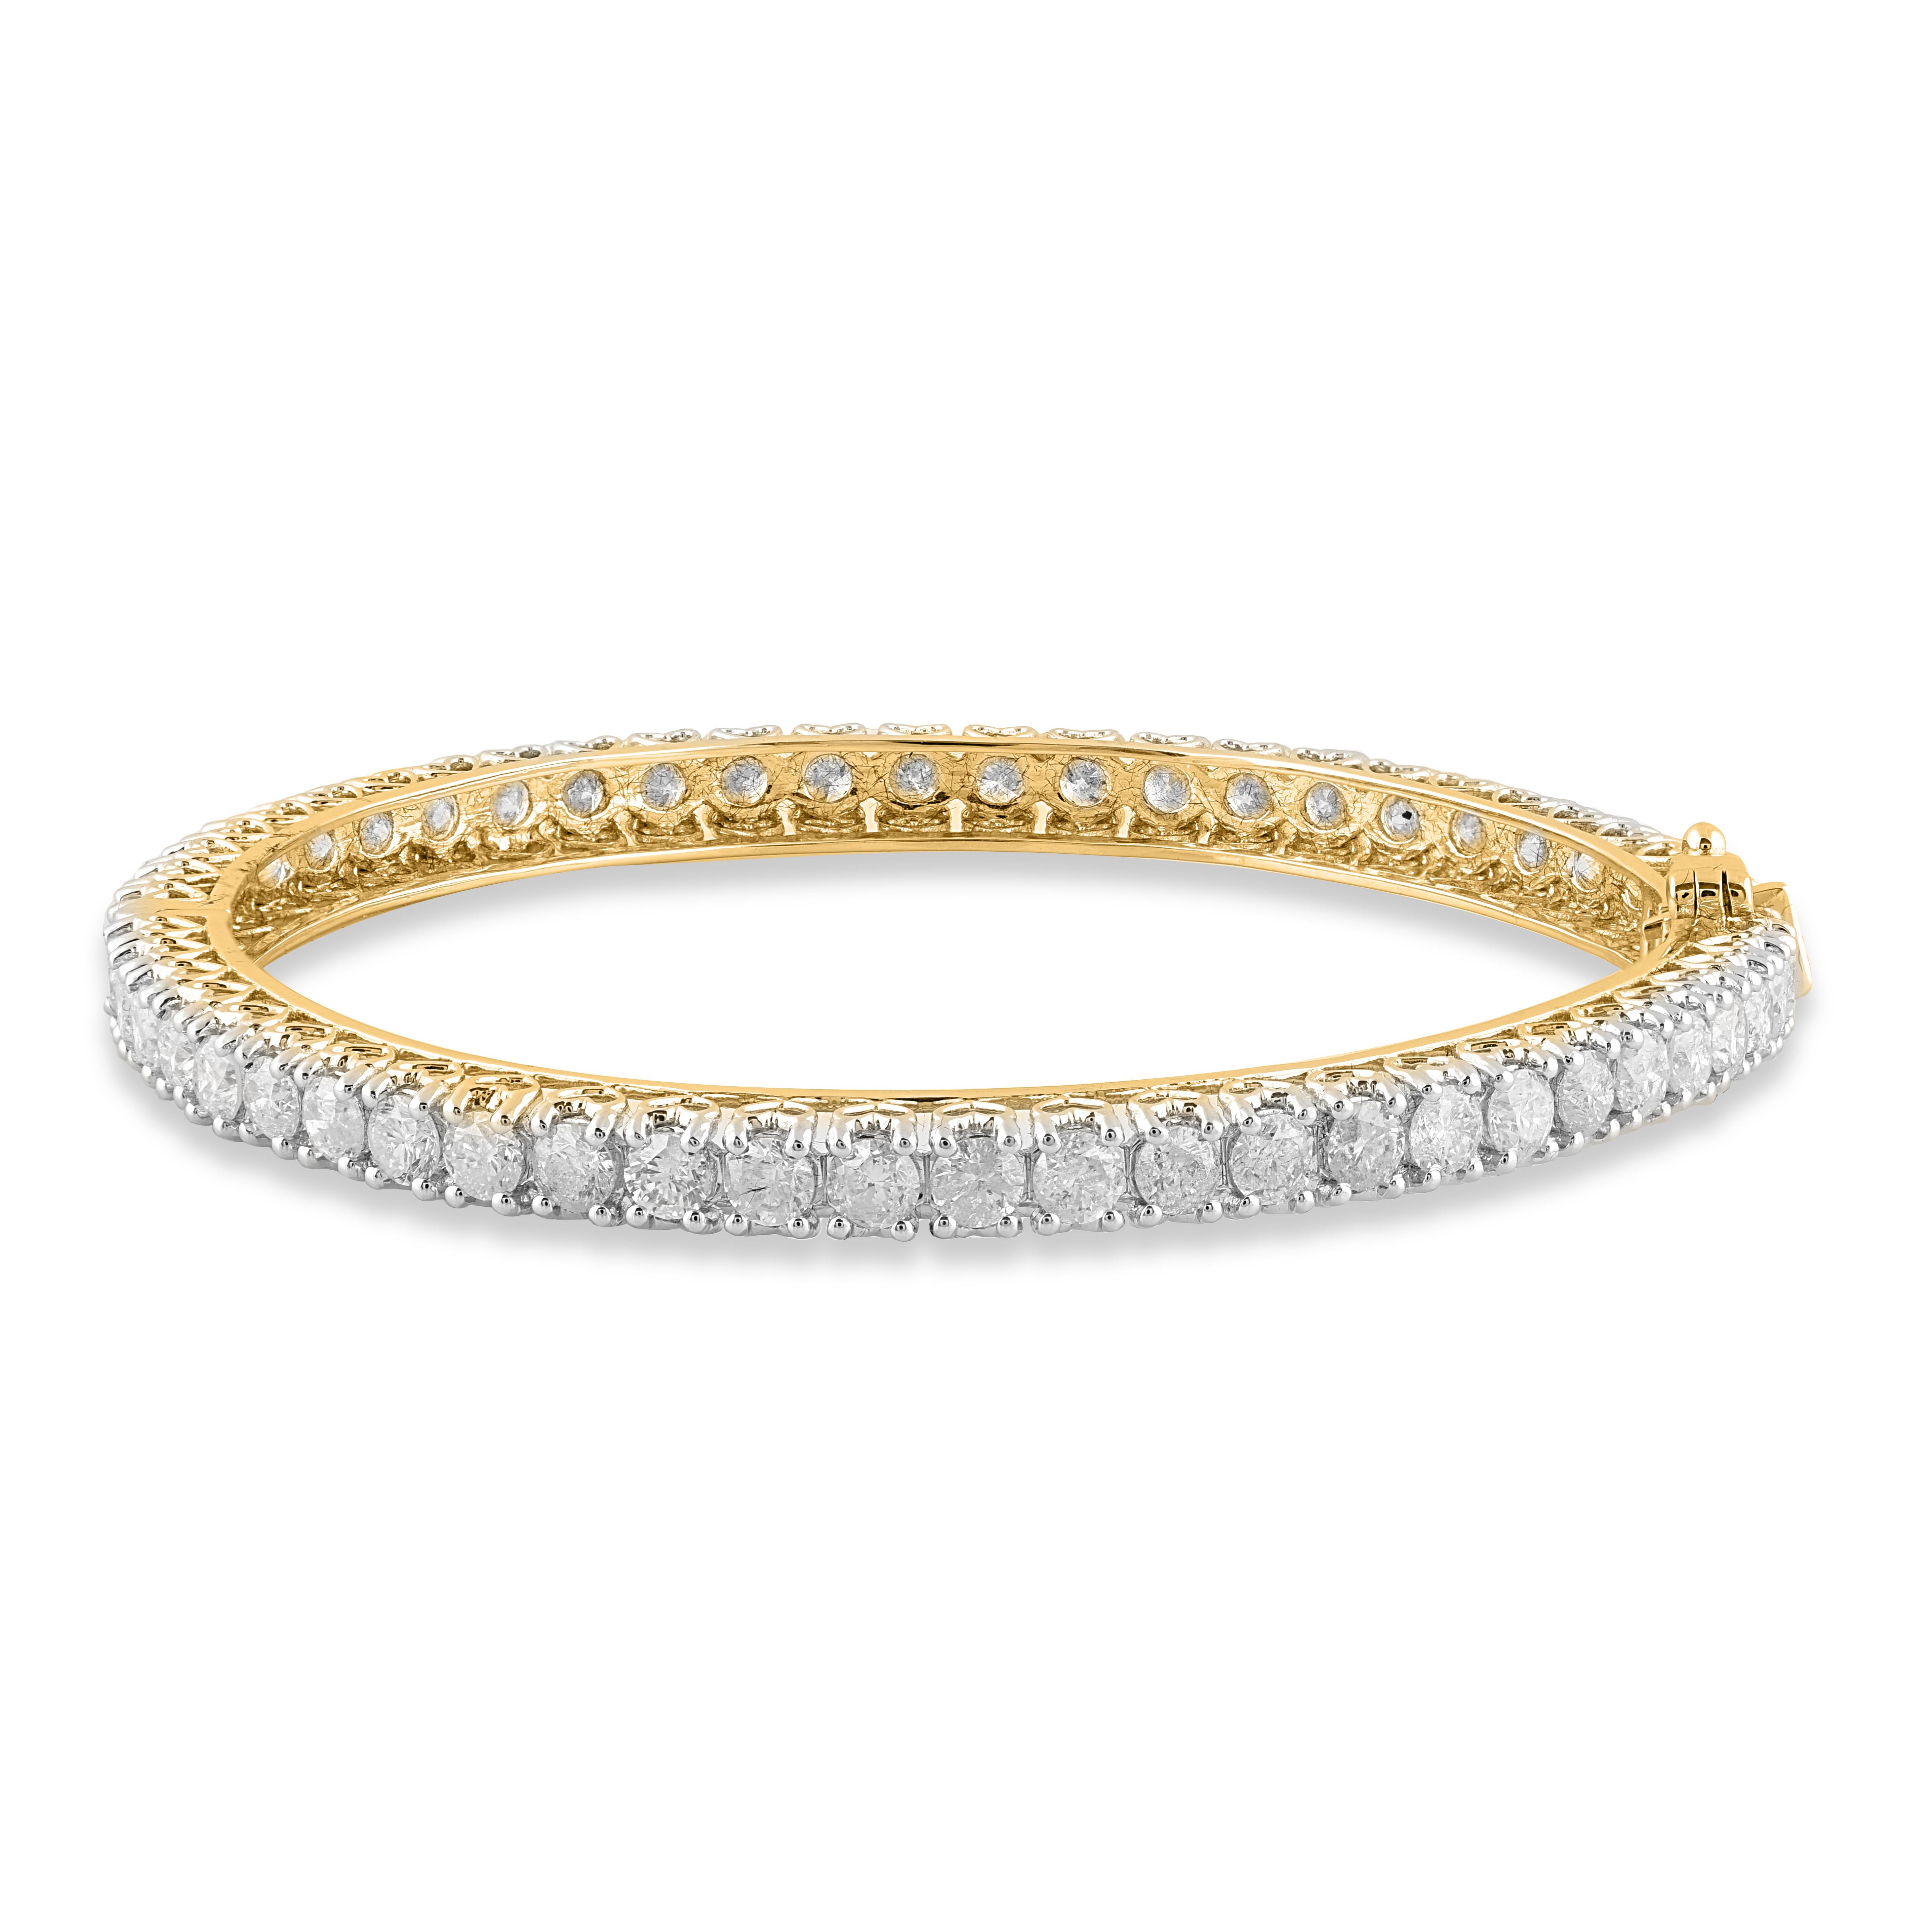 Truly exquisite, she'll admire the effortless look of this graceful diamond bangle. This designer diamond bangle features 54 round brilliant-cut diamond set in prong setting and crafted by our inhouse experts in 18 karat yellow gold. The total